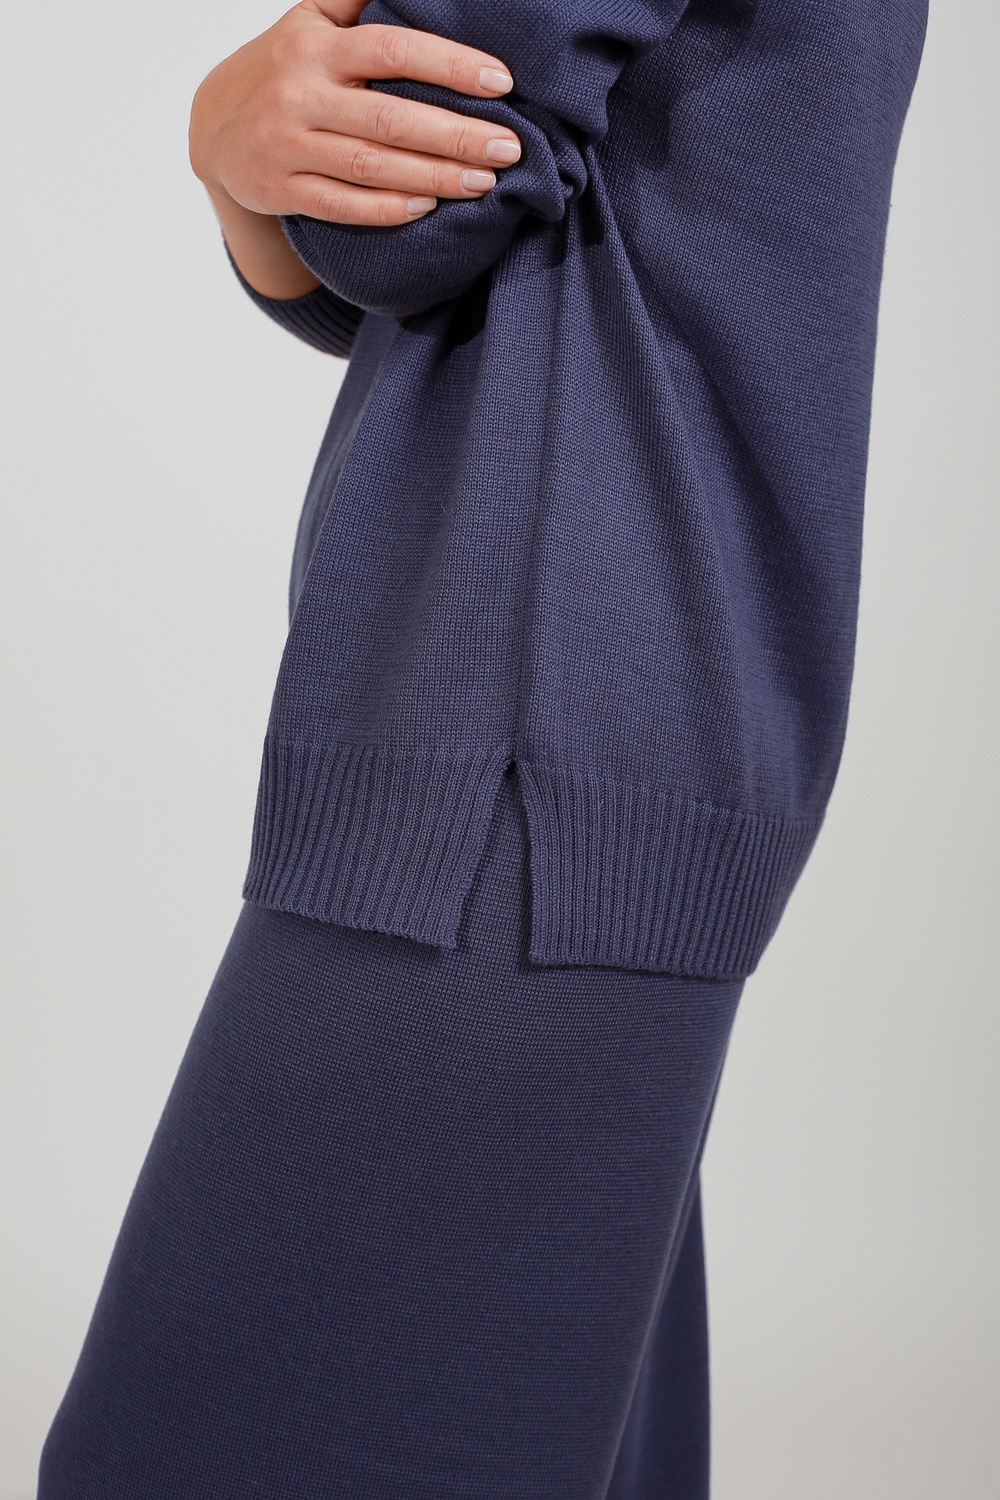 Knitted suit. Merino wool blend sweater and trousers 17 colors